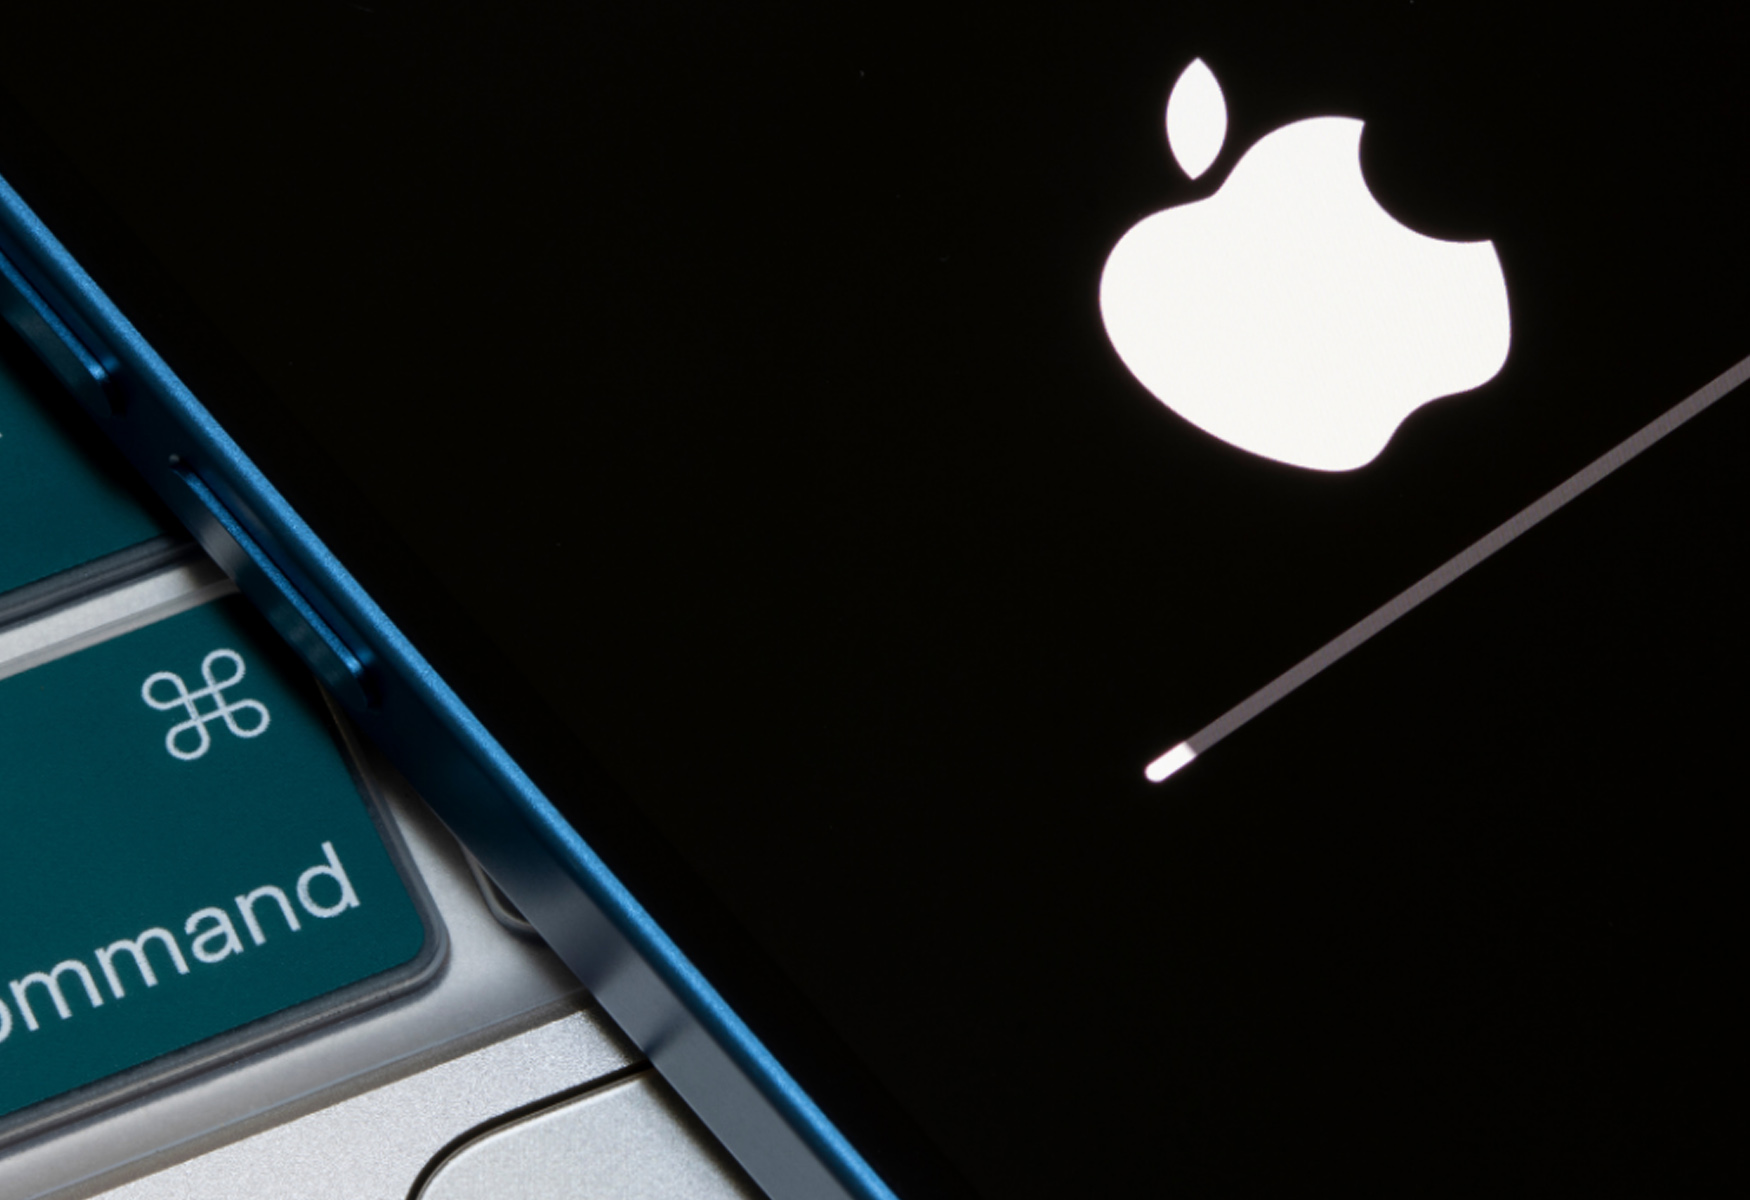 Apple Releases Security Updates To Fix Actively Exploited Zero-Day Vulnerabilities